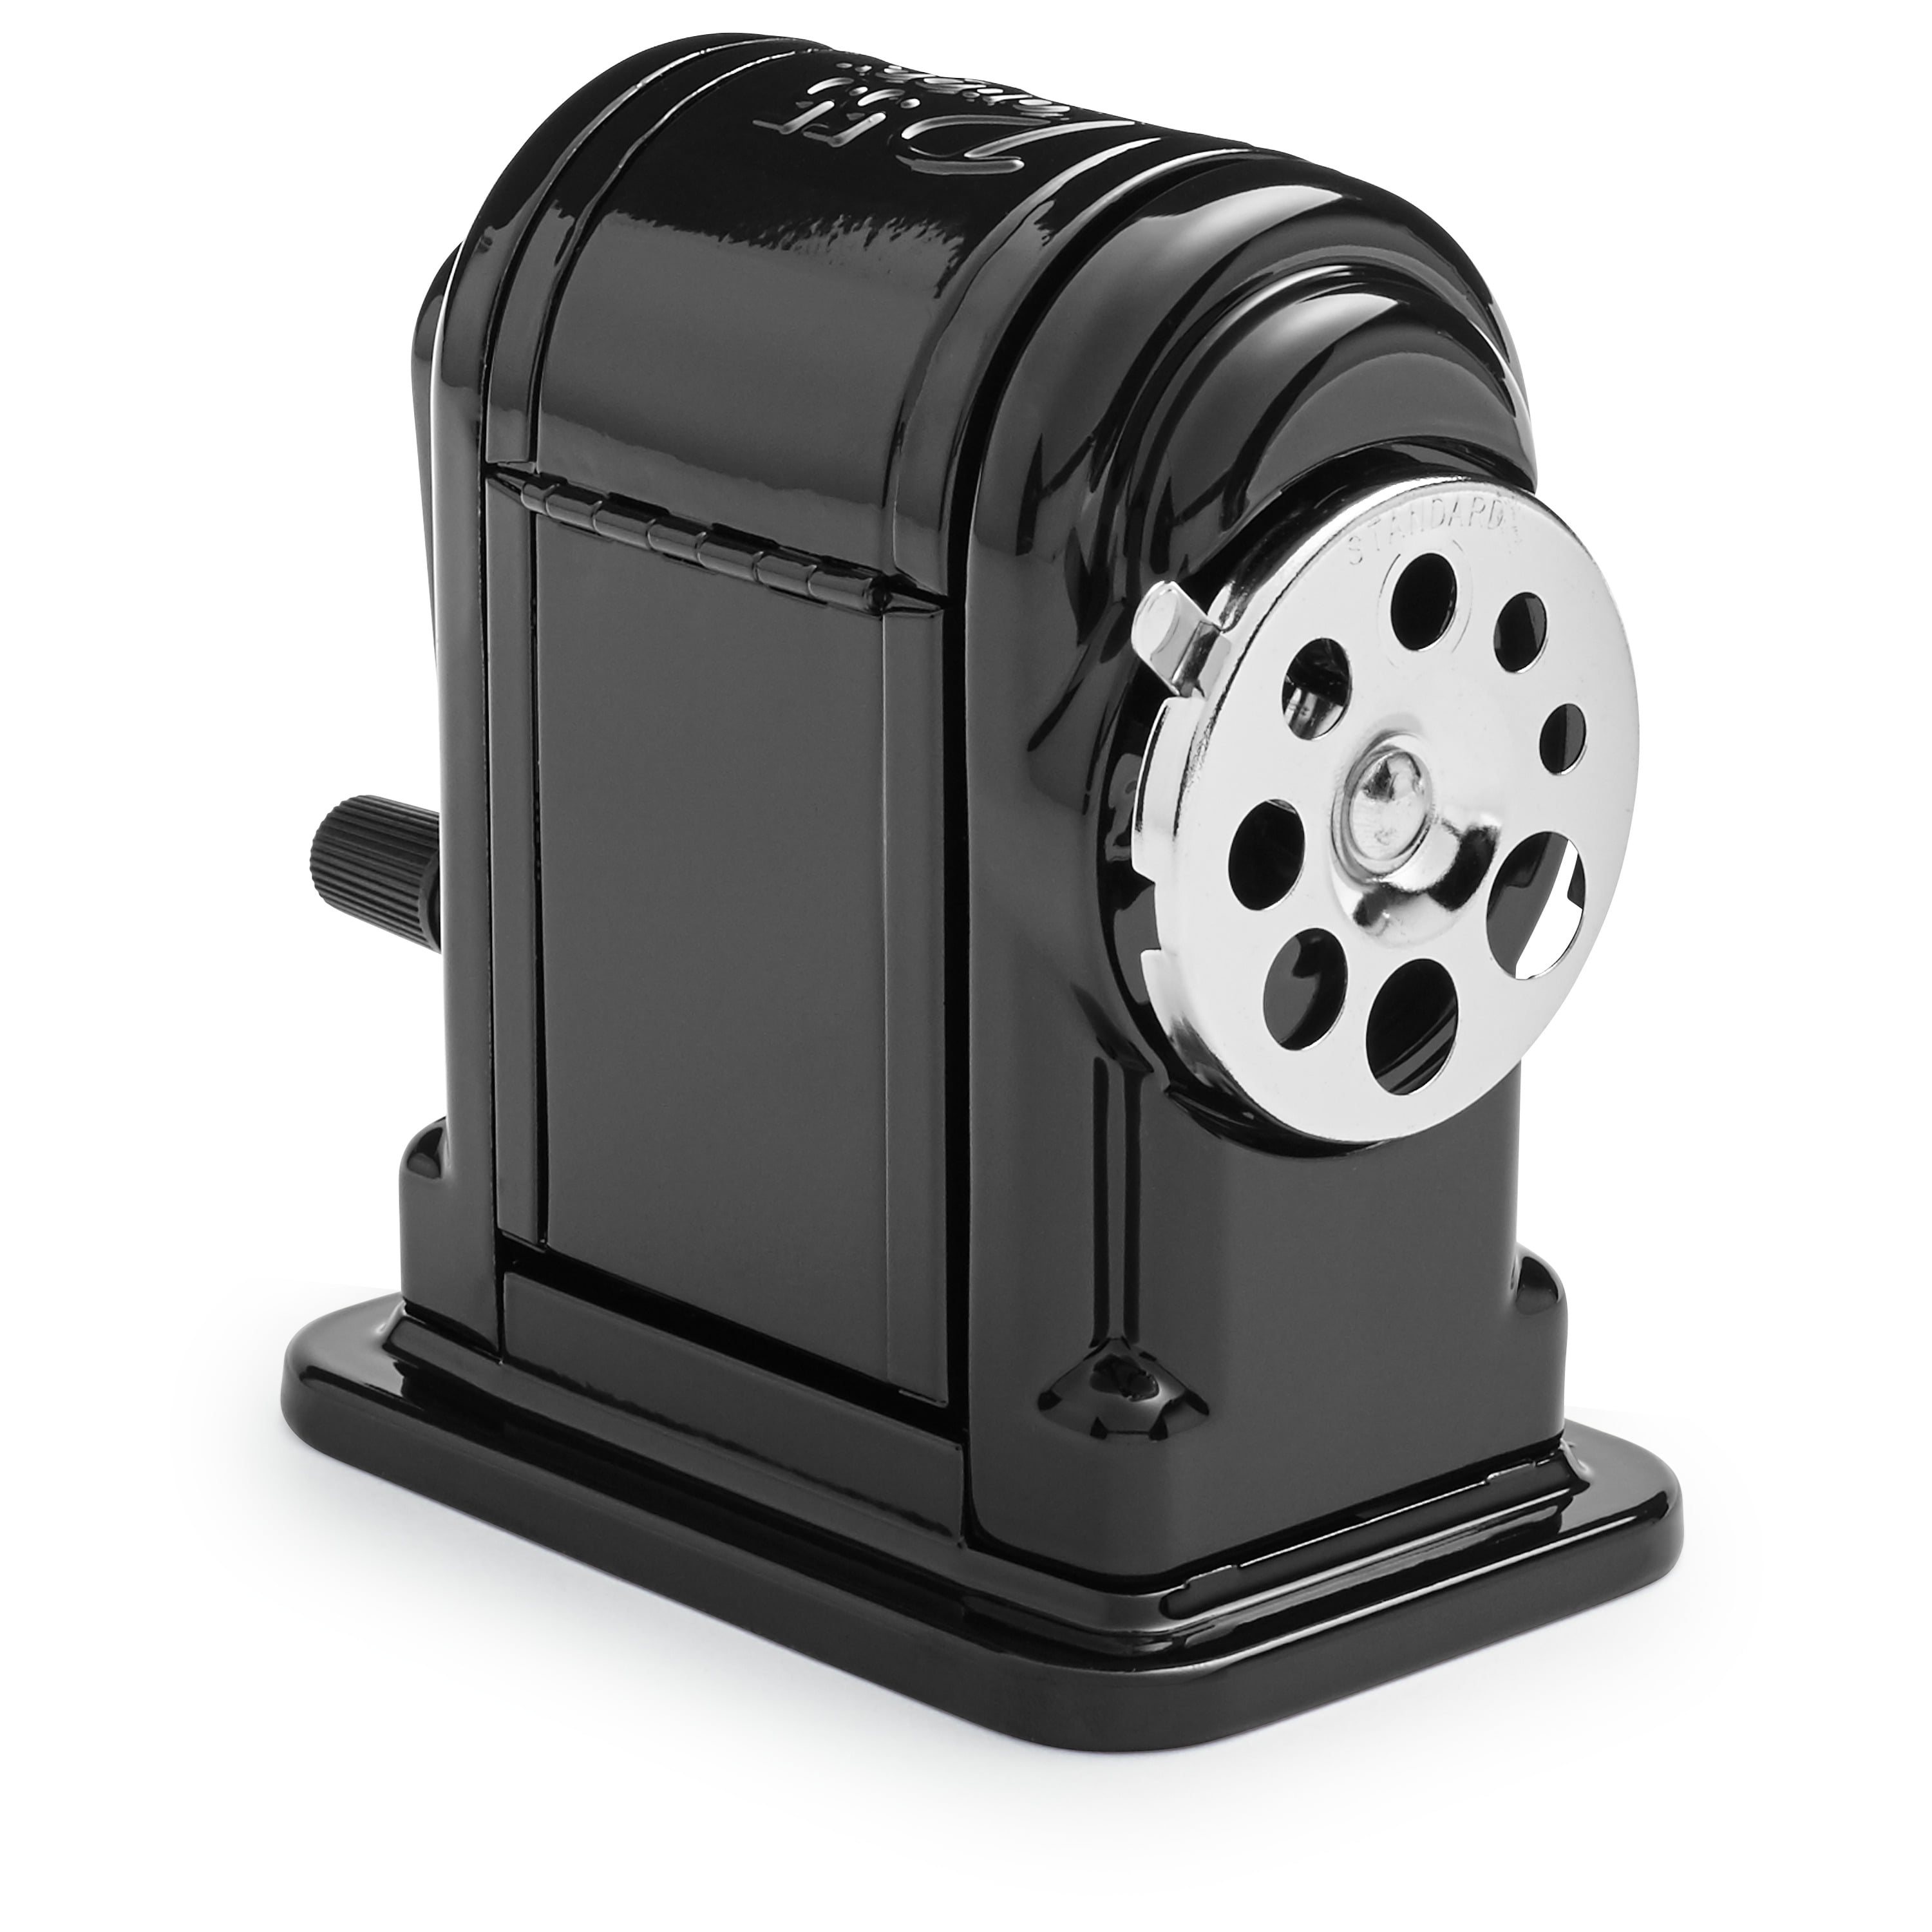 2302001 New Derwent Super Point Manual Helical Pencil Sharpener Free Shippin 